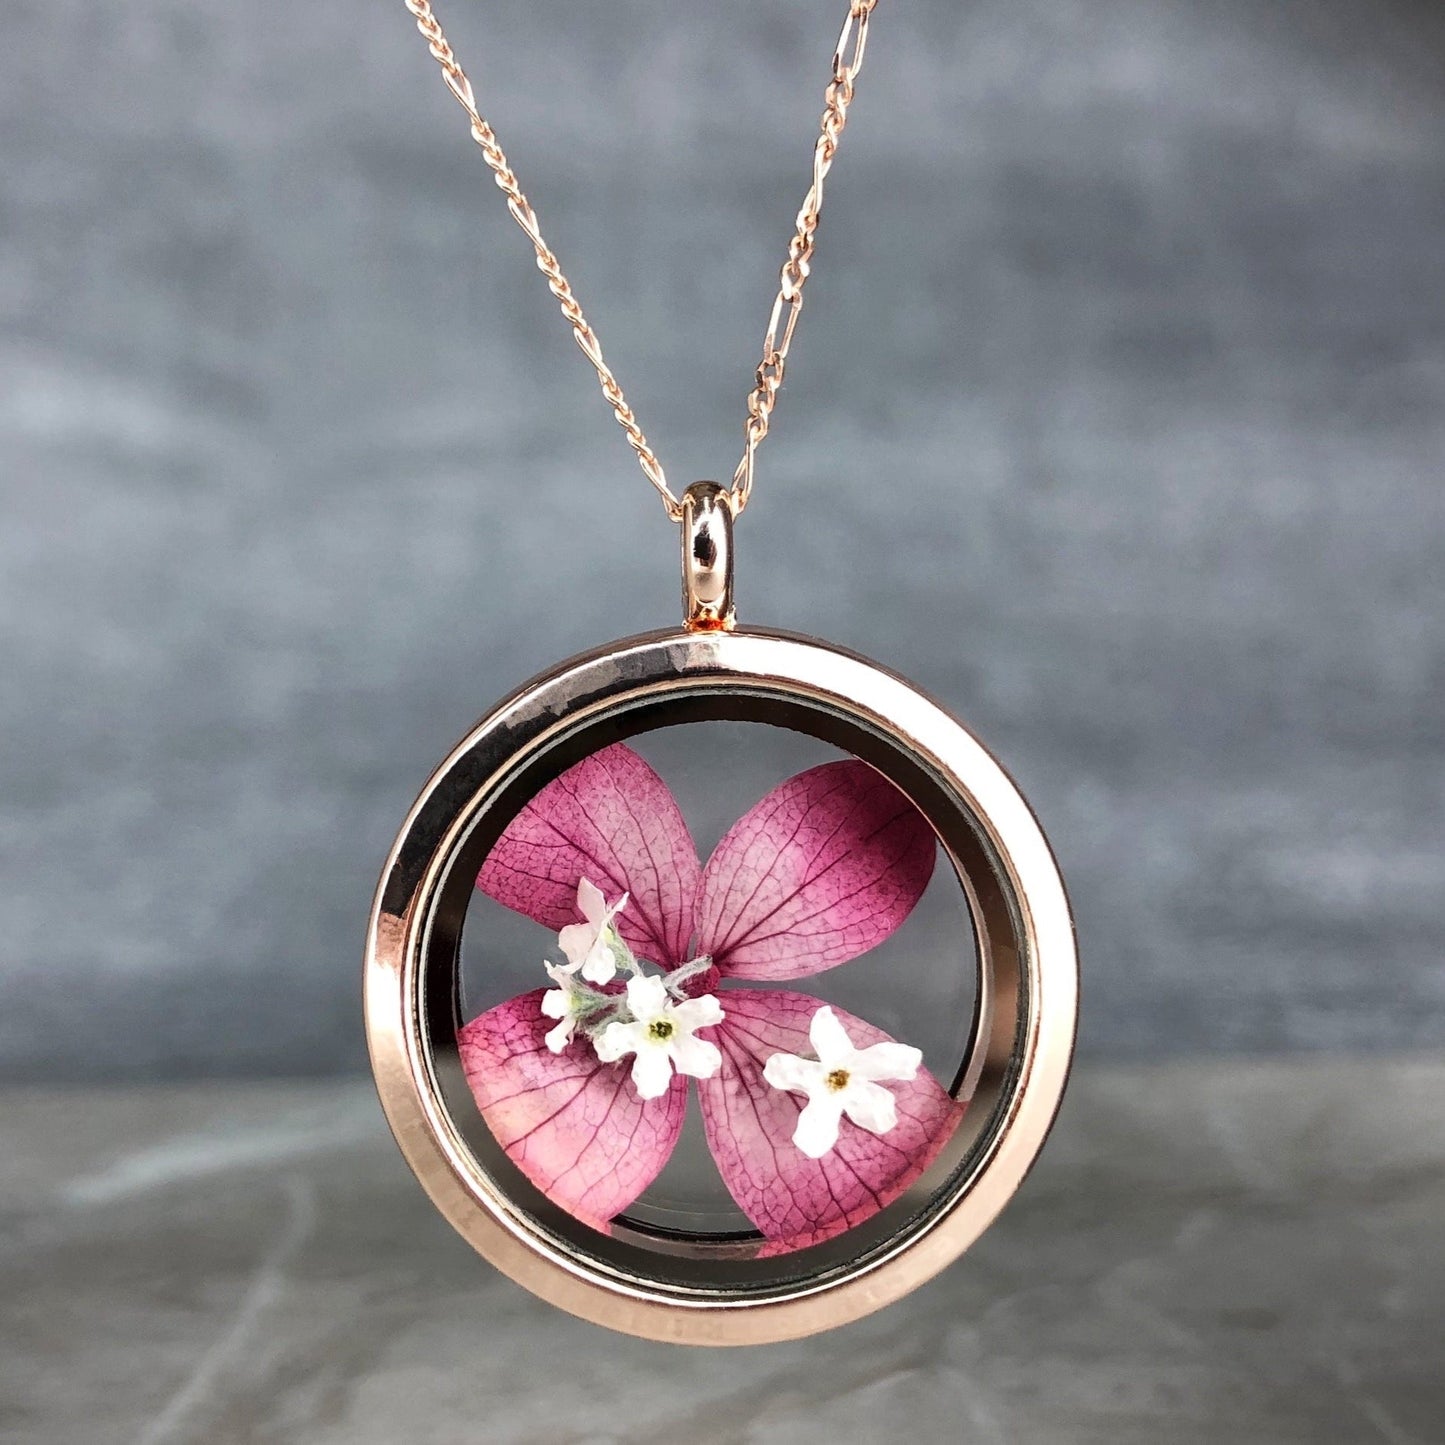 Hortensja i Forget-Me-Blossoms 925 Sterling RoseGold Zielony Łańcuch Medalion